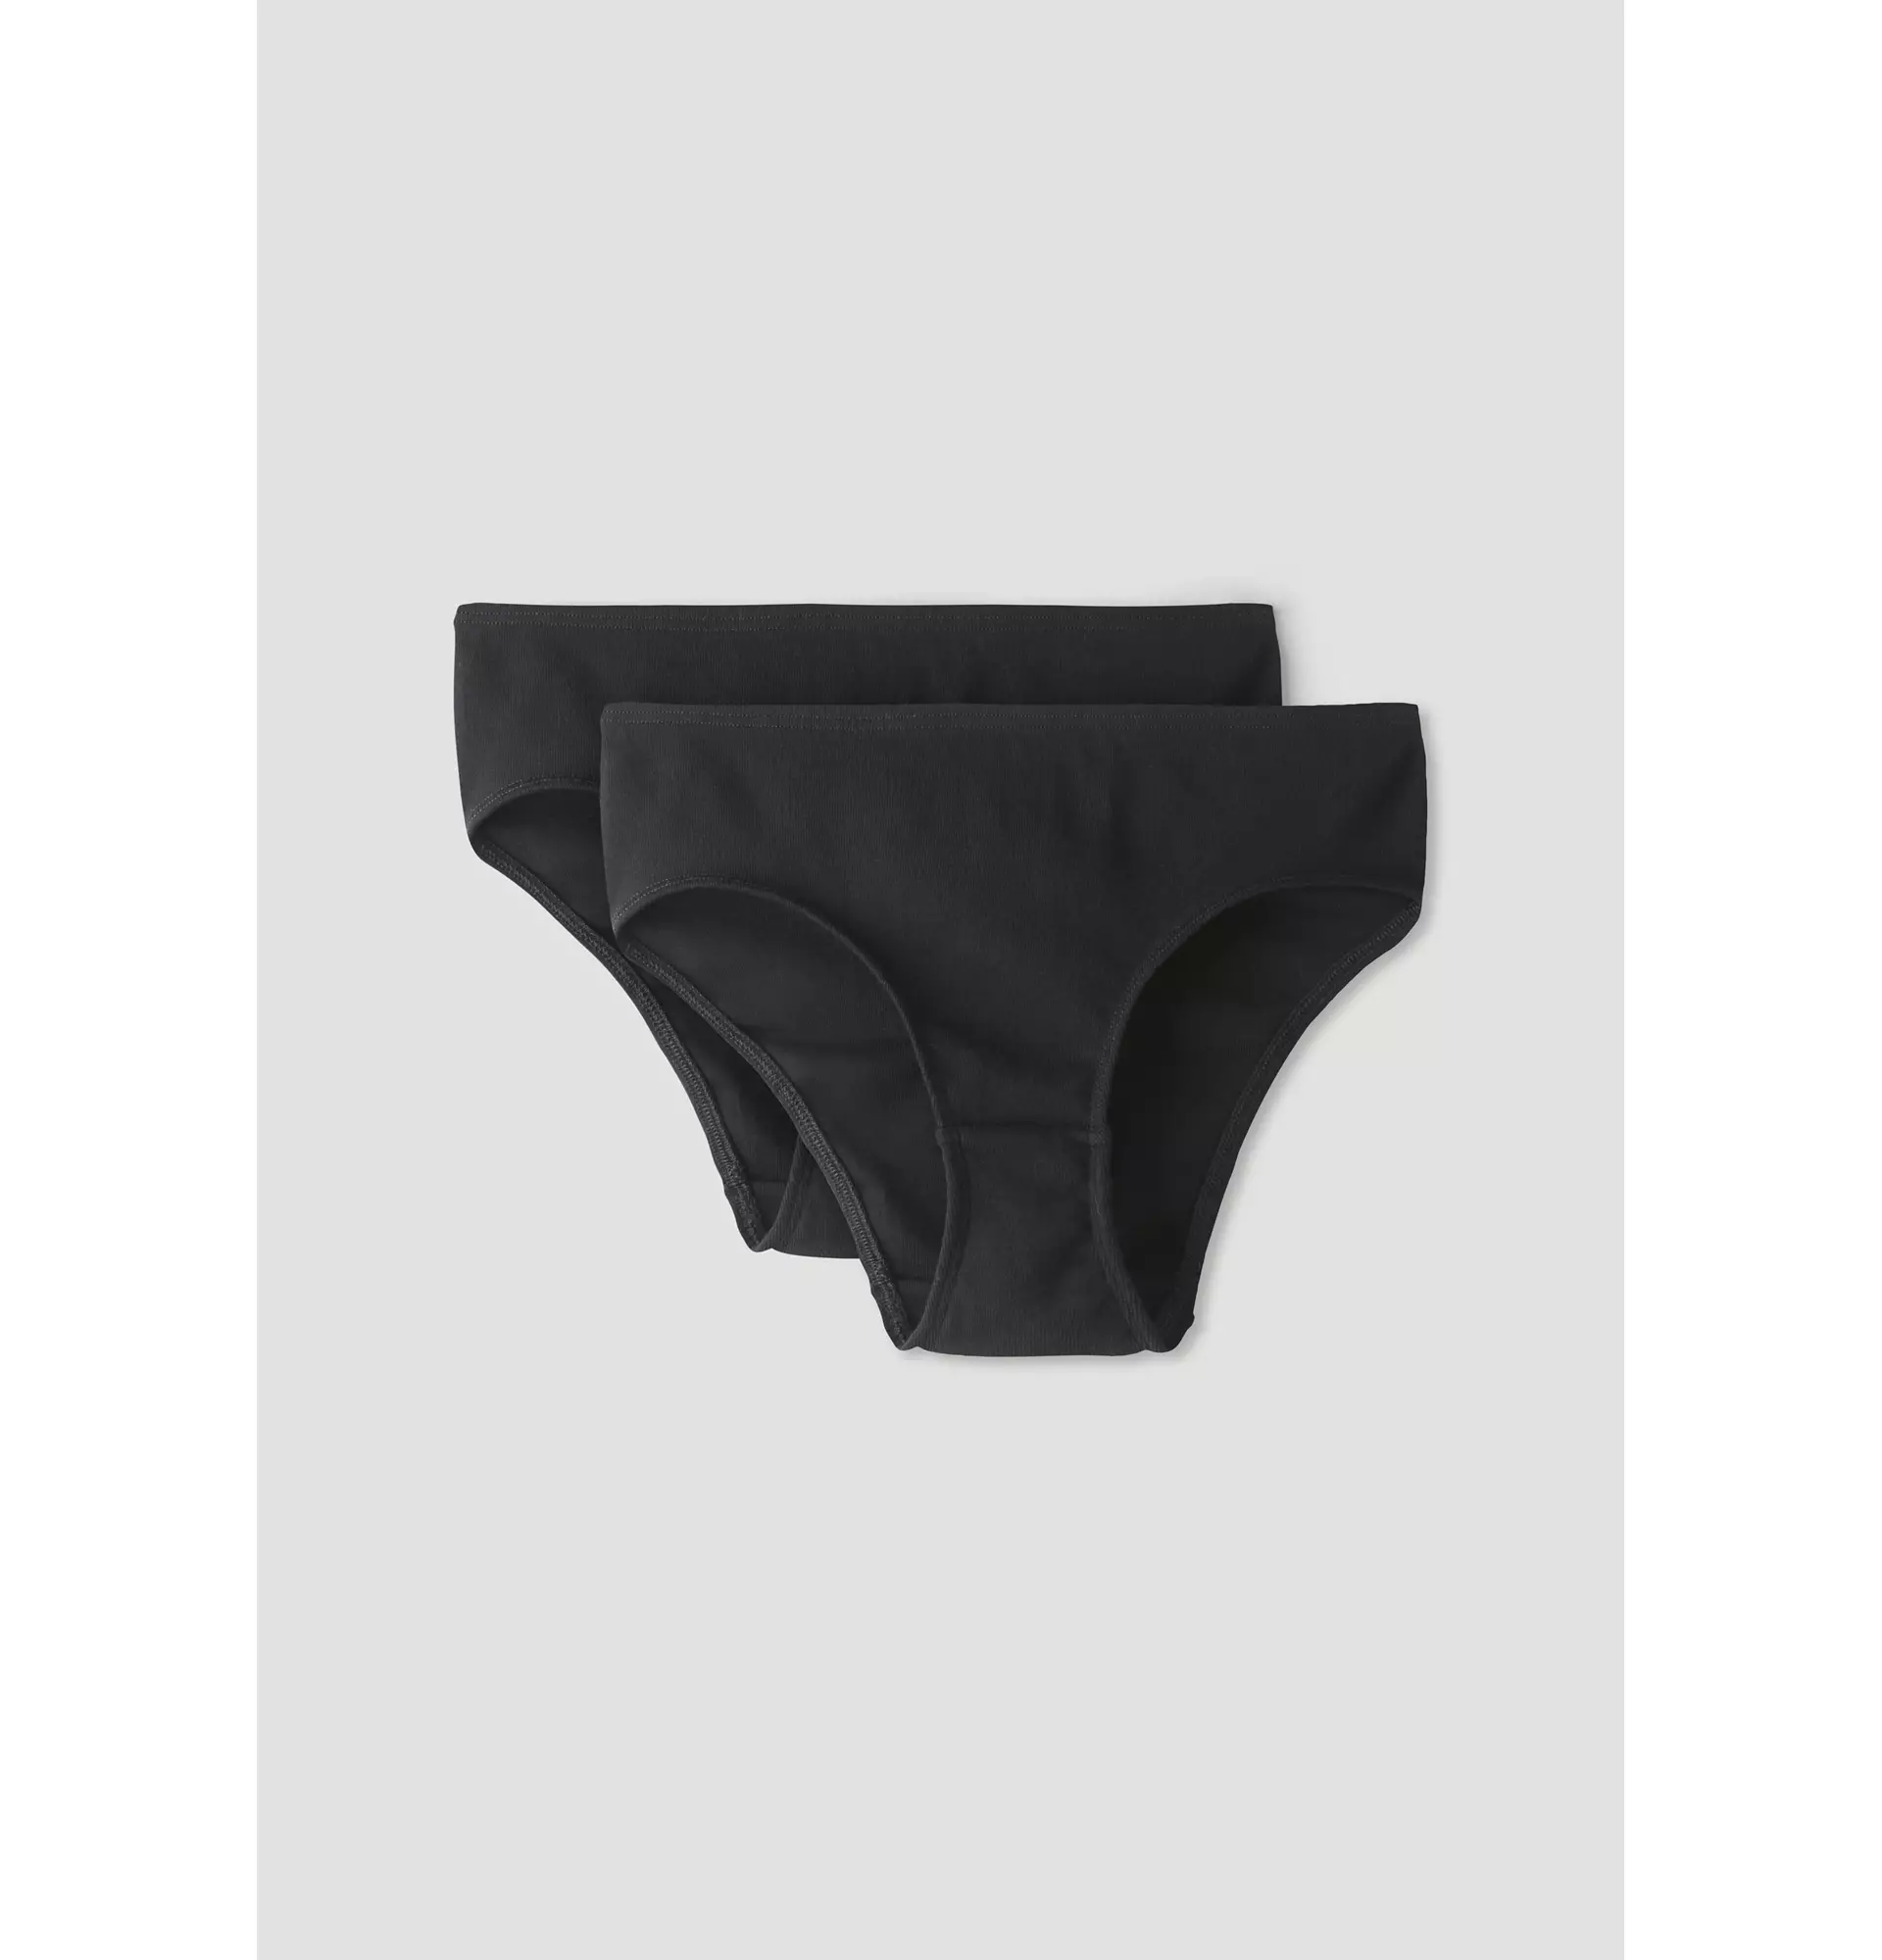 Regular cut briefs in a pack of 2 PURE NATURE made from pure